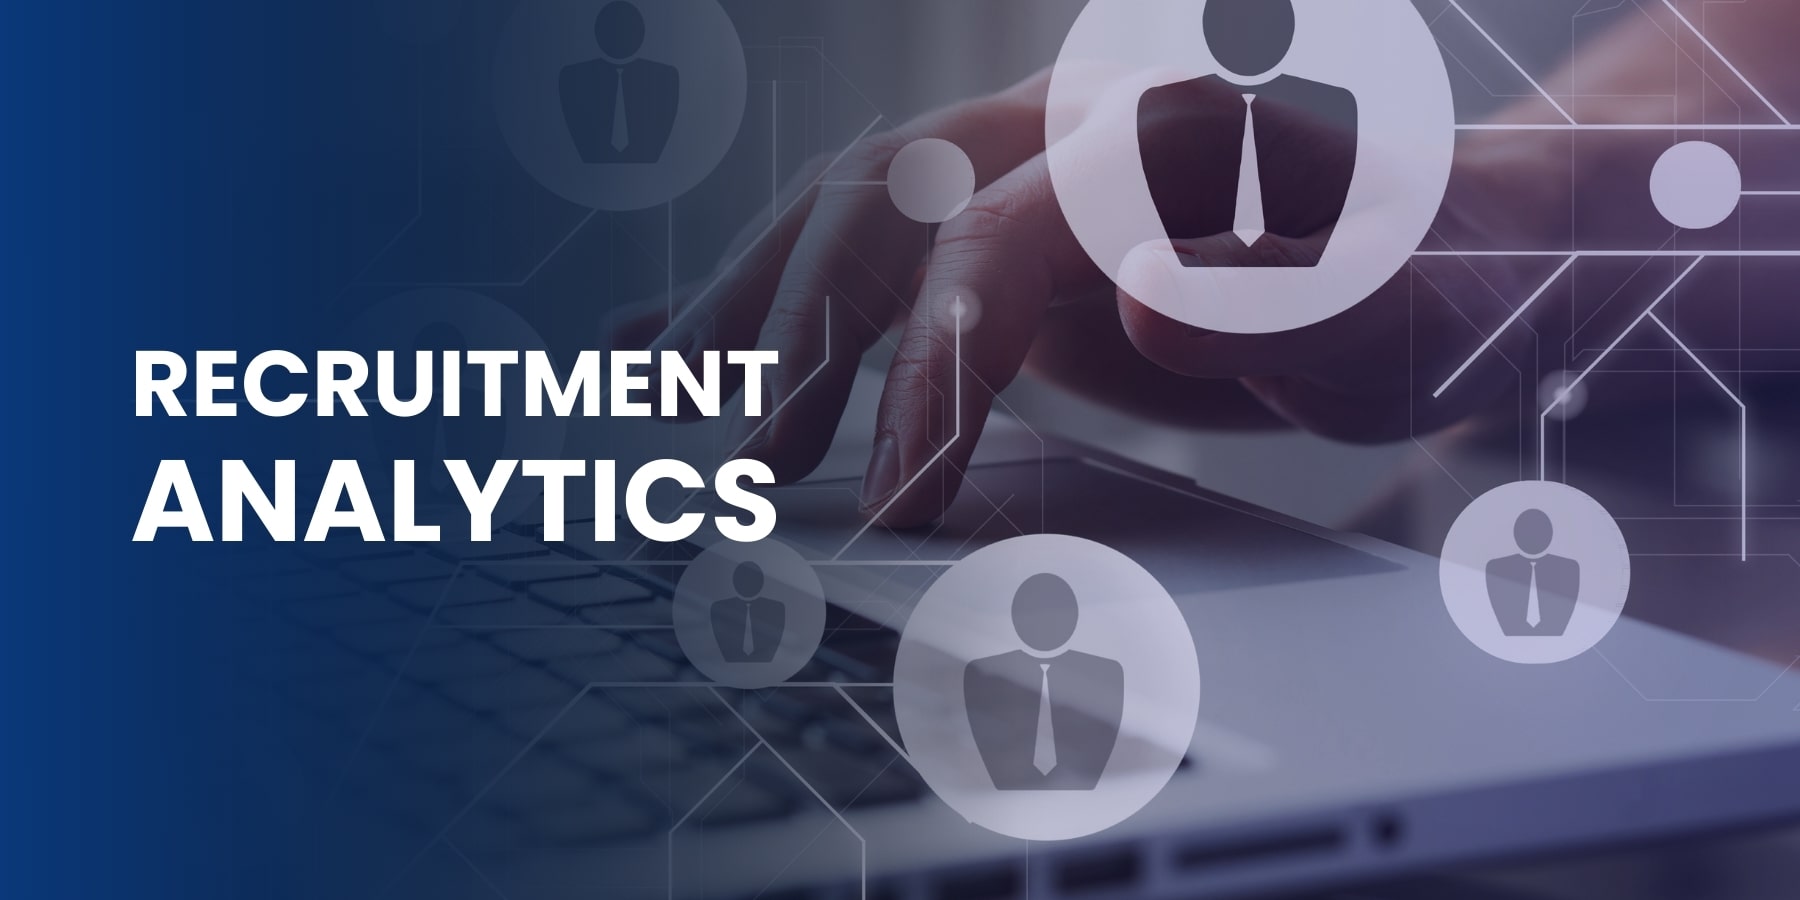 Predicting the Future of Talent: How Analytics is Changing Recruitment Forever